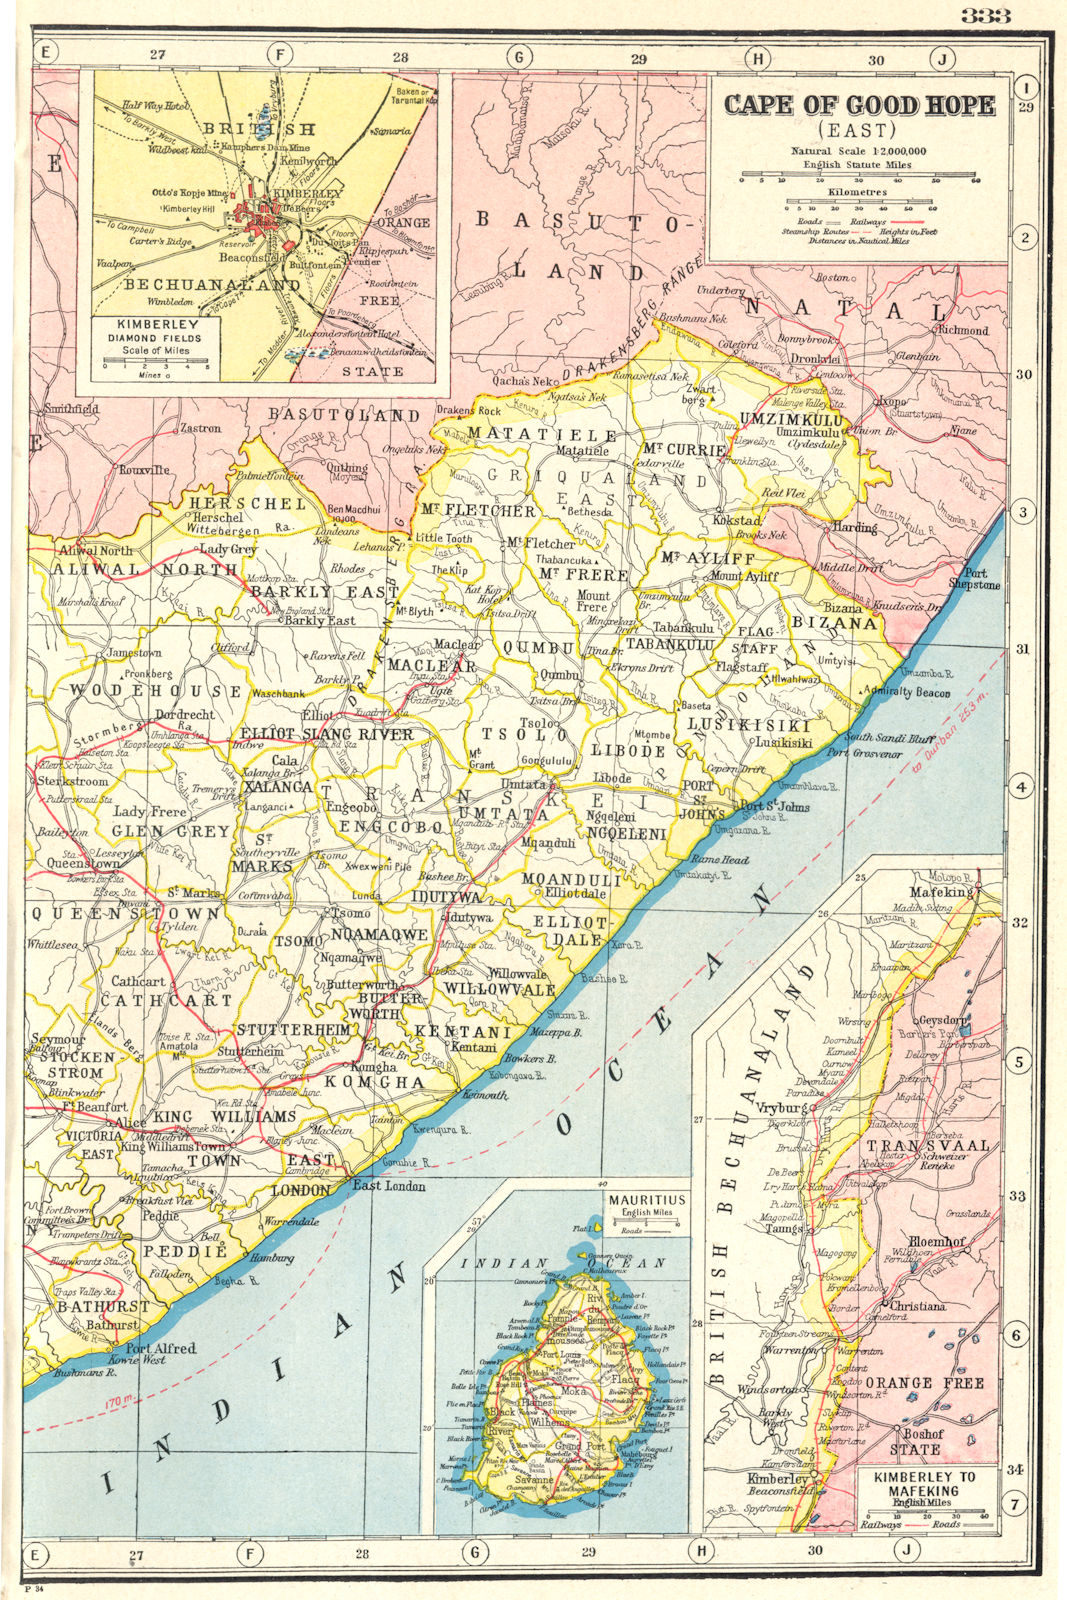 EASTERN CAPE. Inset map of the Kimberley diamond fields. South Africa 1920